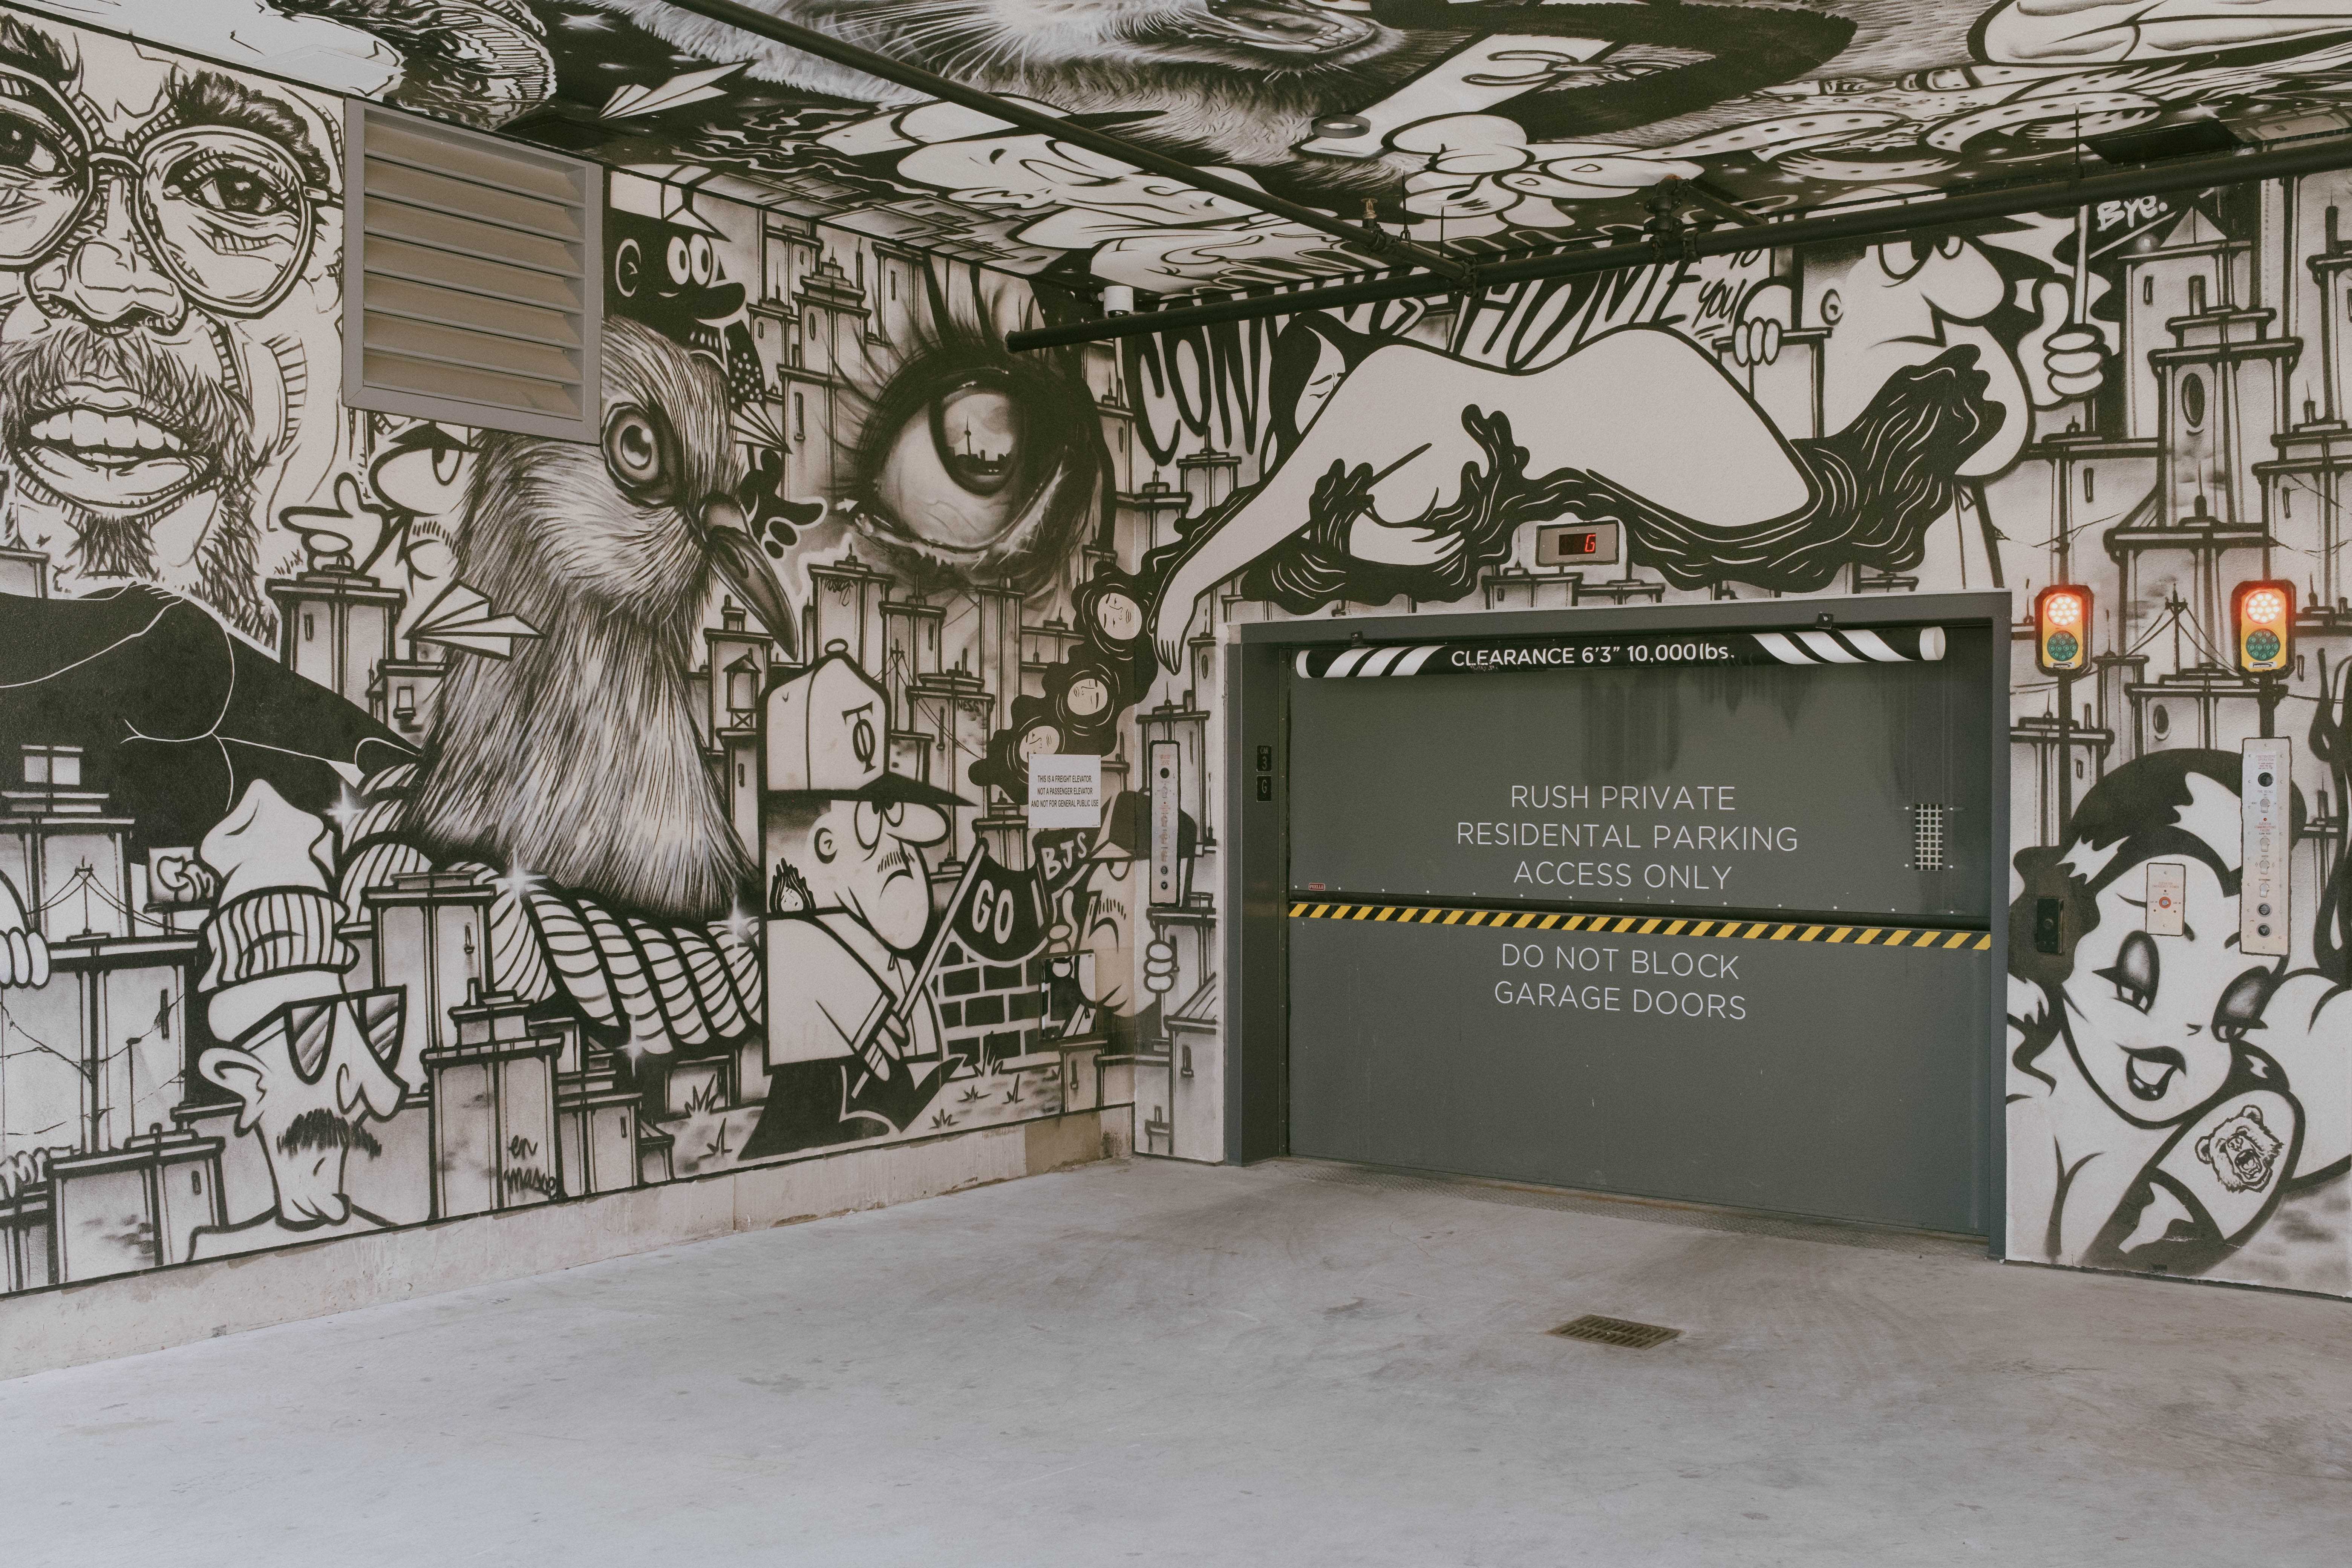 Garage entry with an elaborate black and white mural